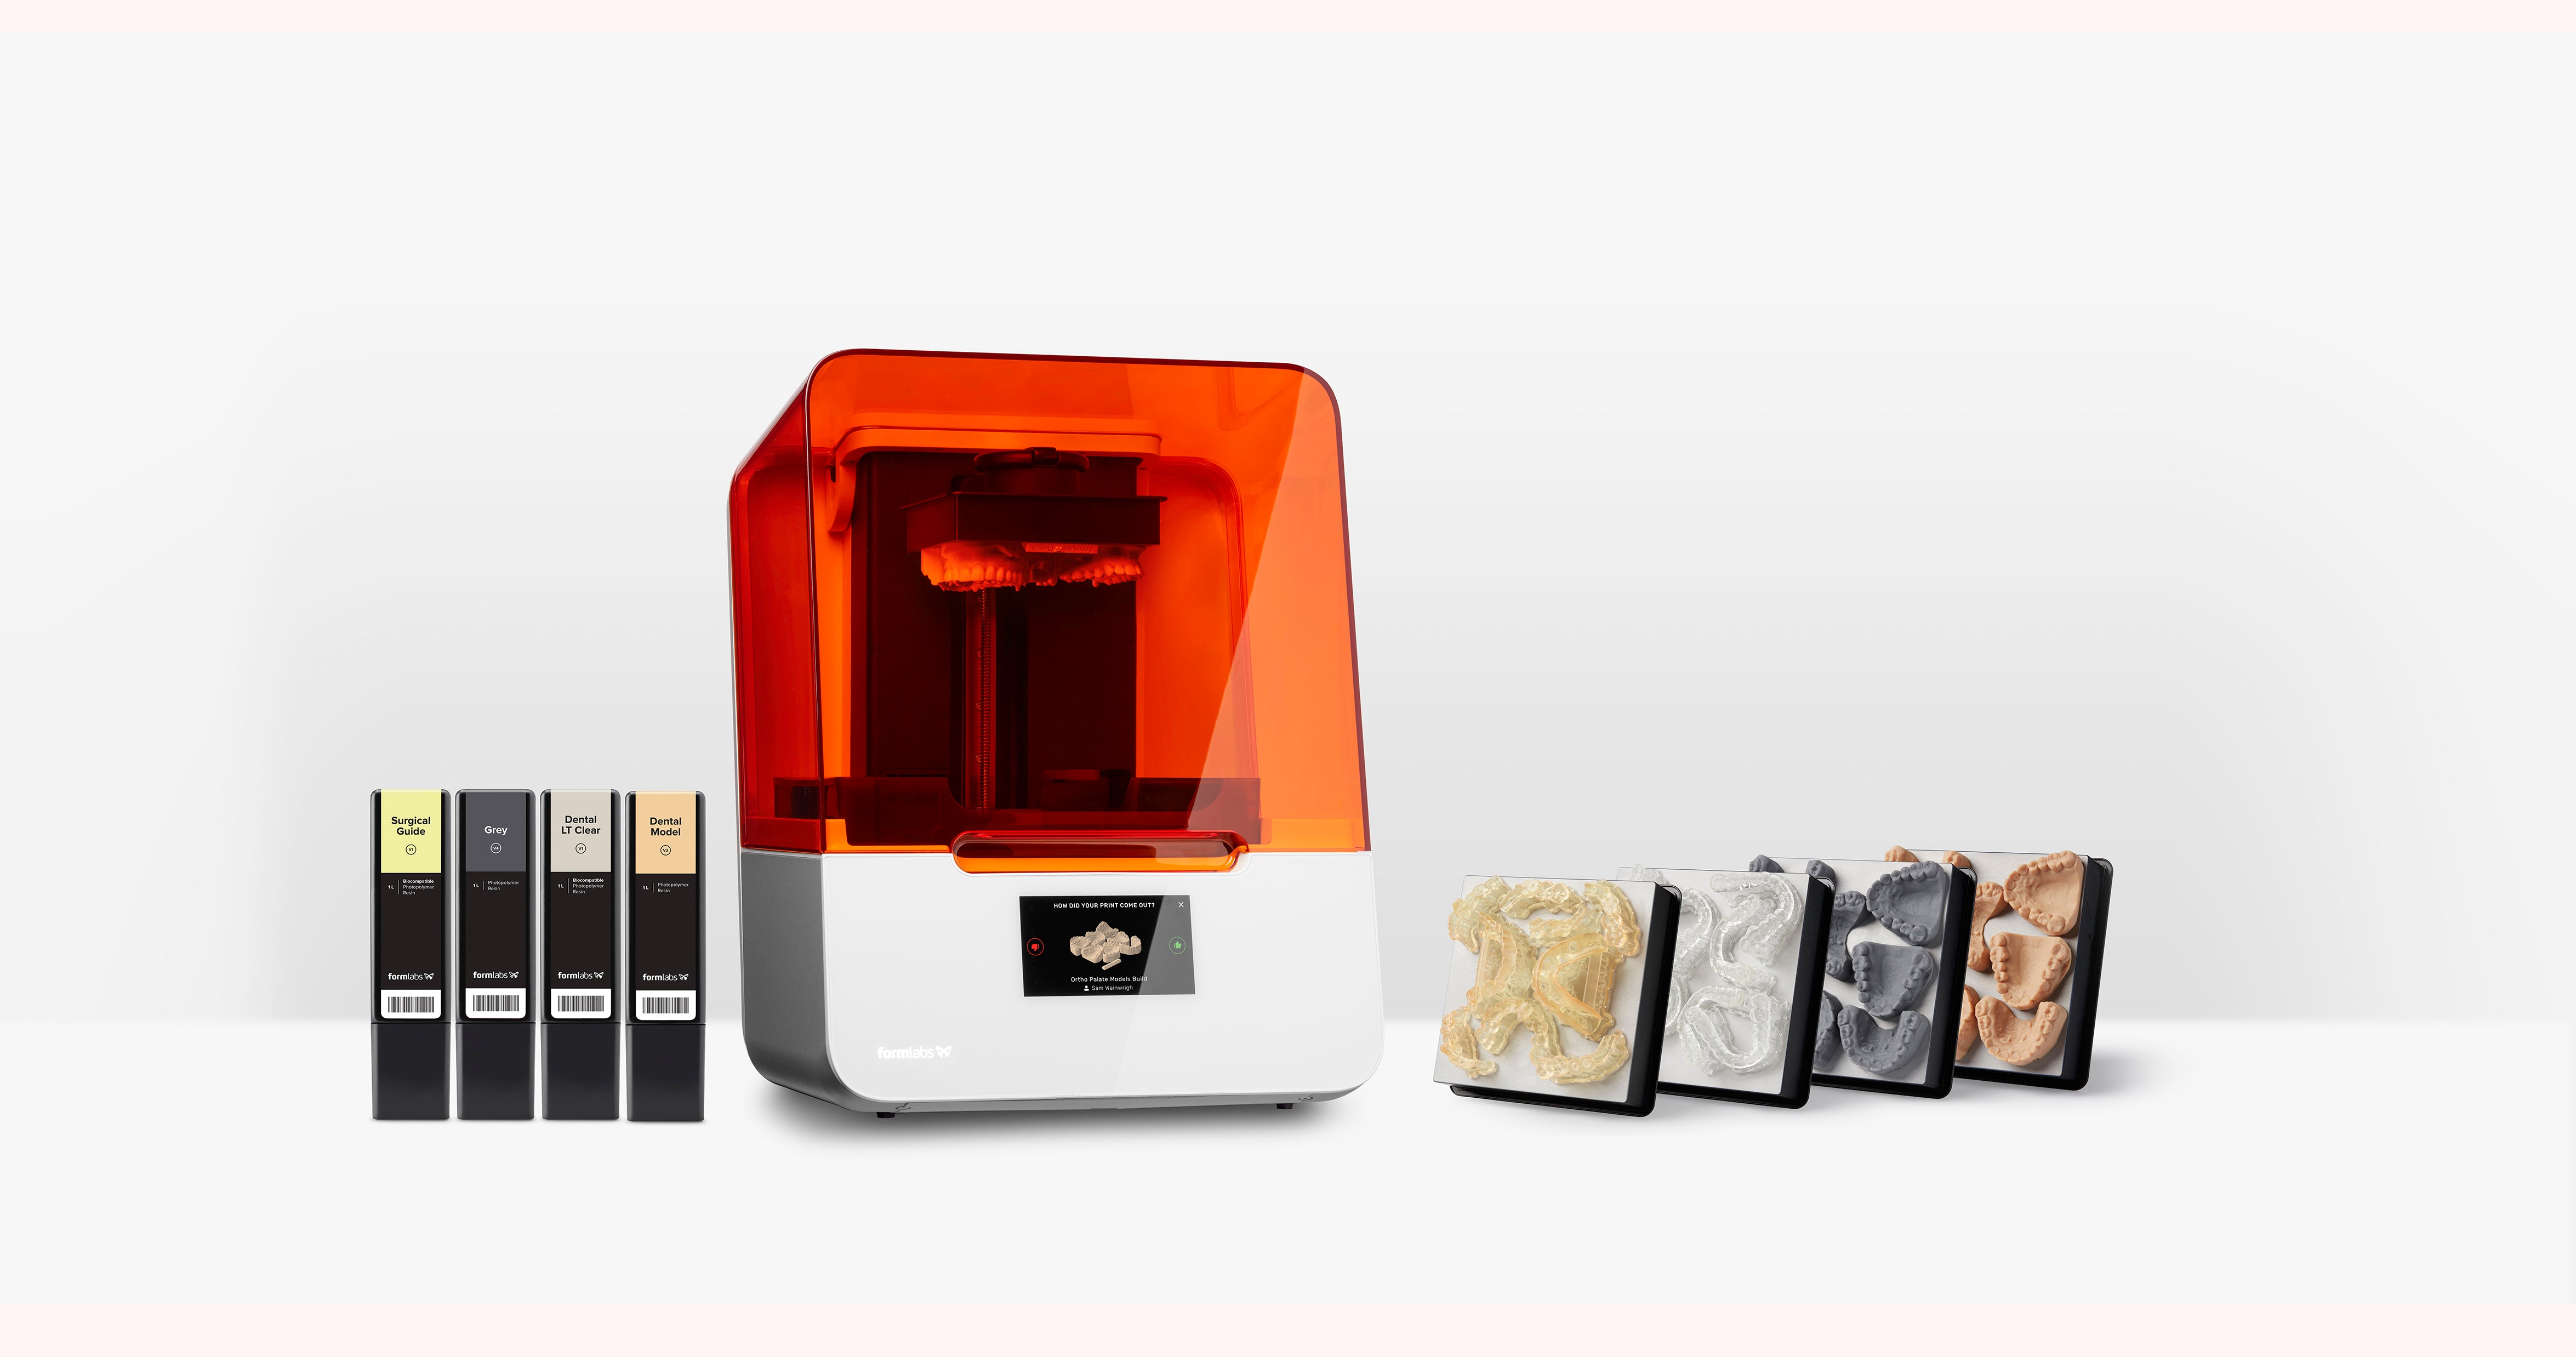 Formlabs Biomed Amber Resin biocompatible, for 3D printing